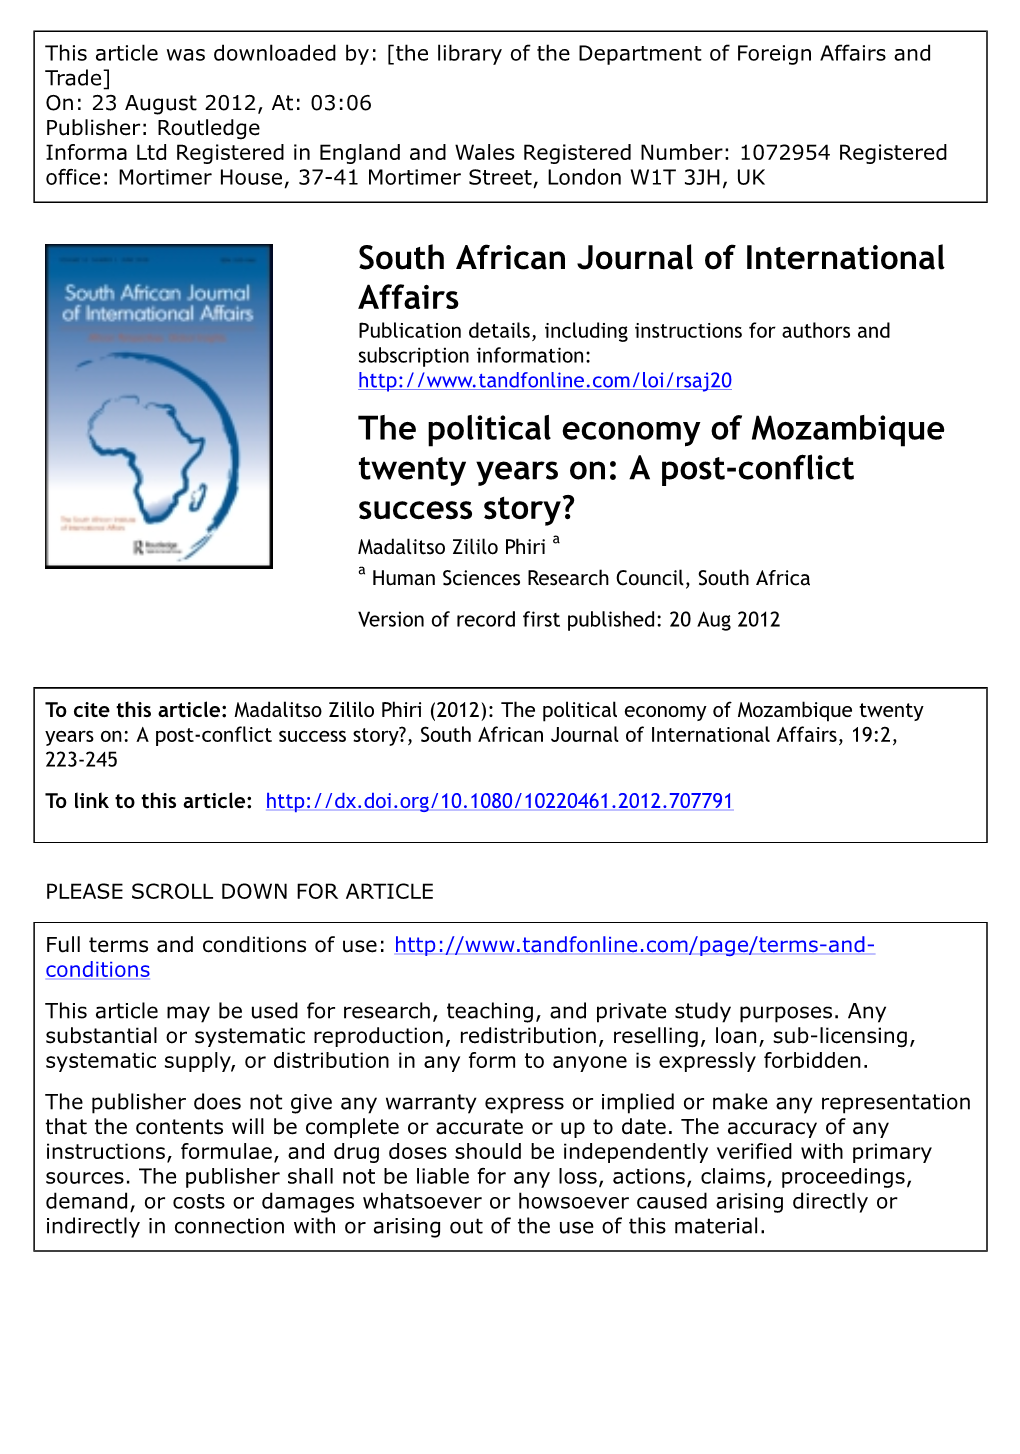 The Political Economy of Mozambique Twenty Years On